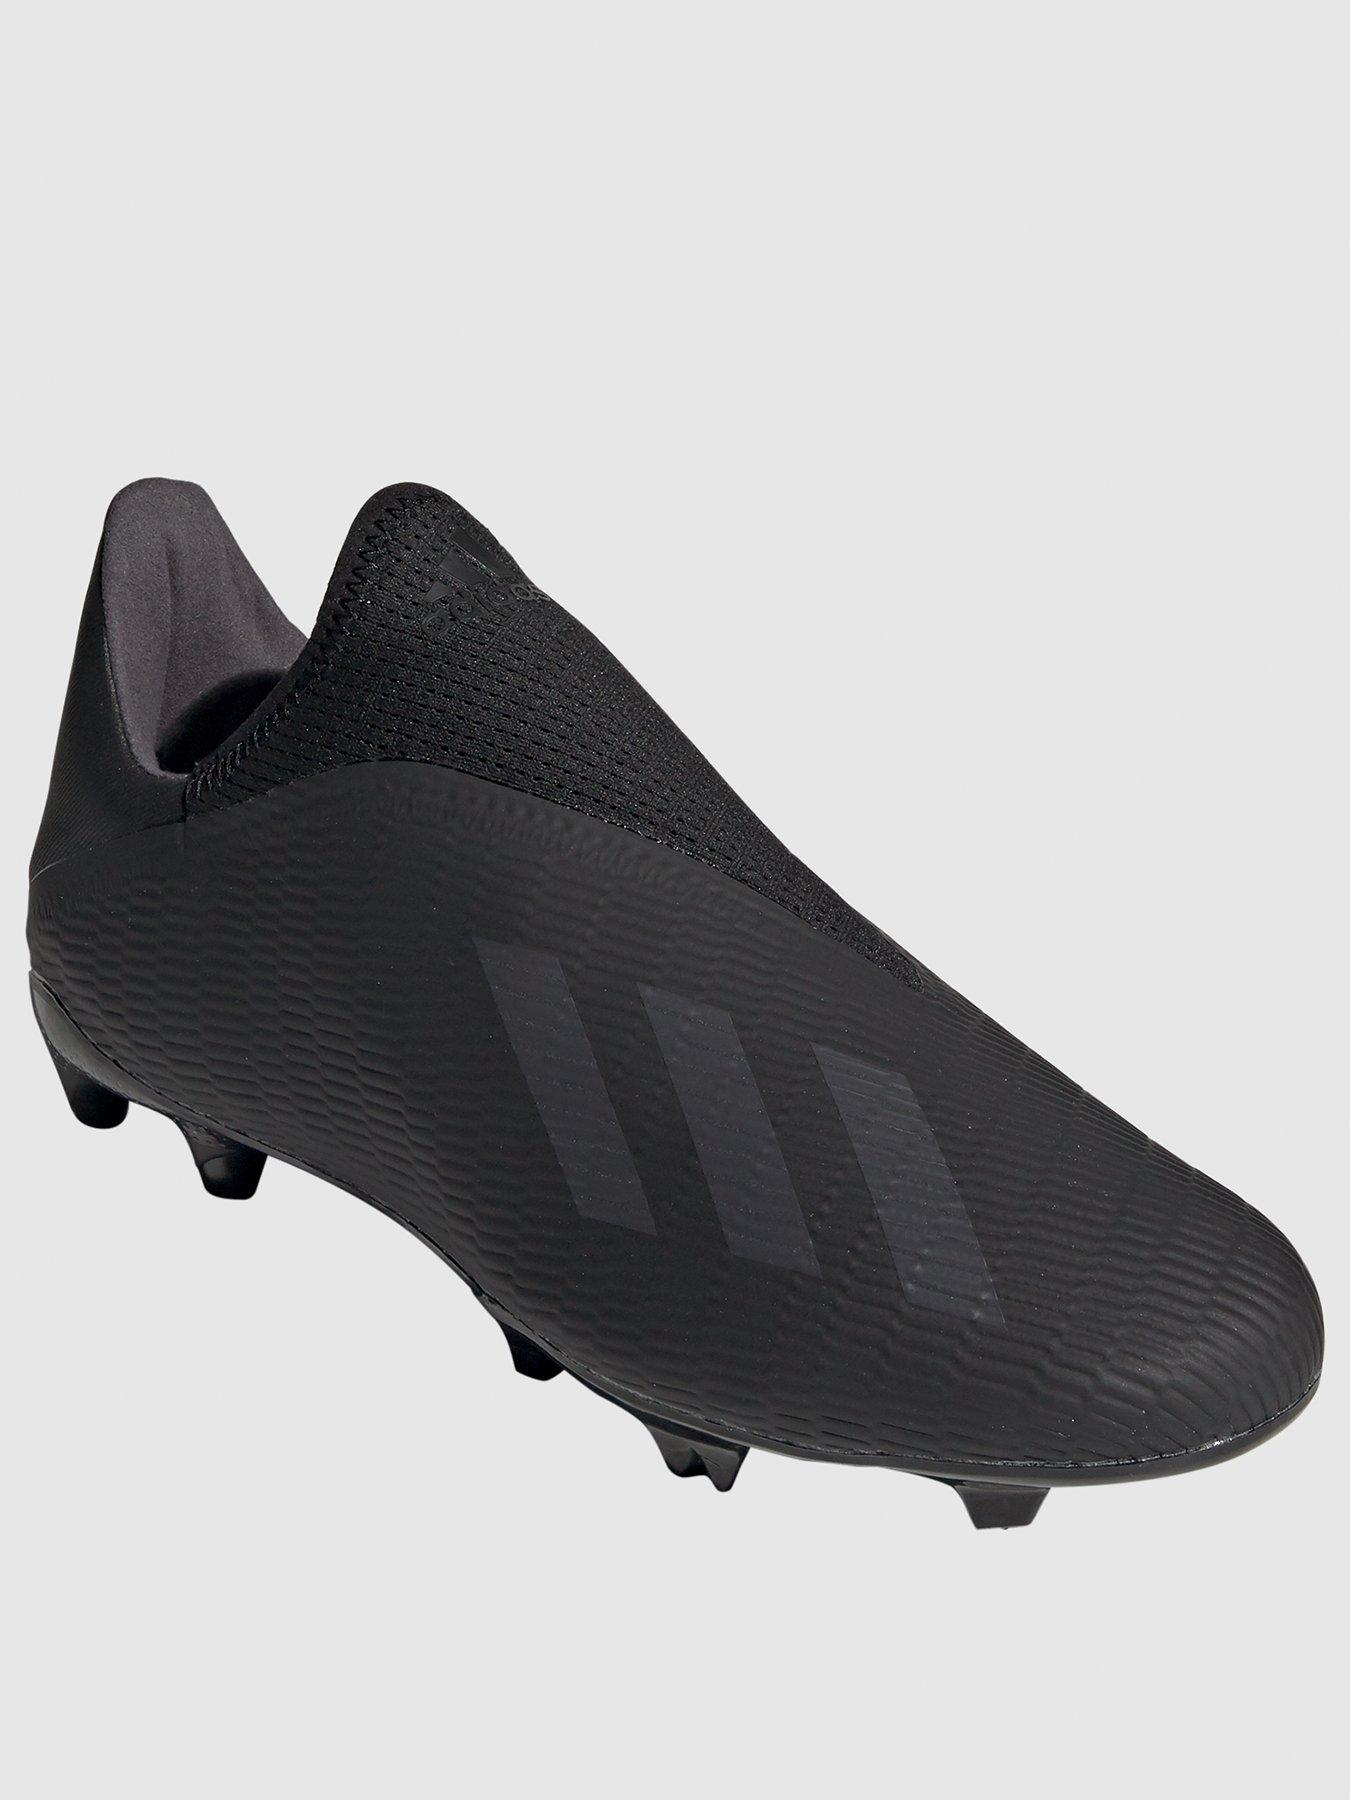 all black laceless football boots